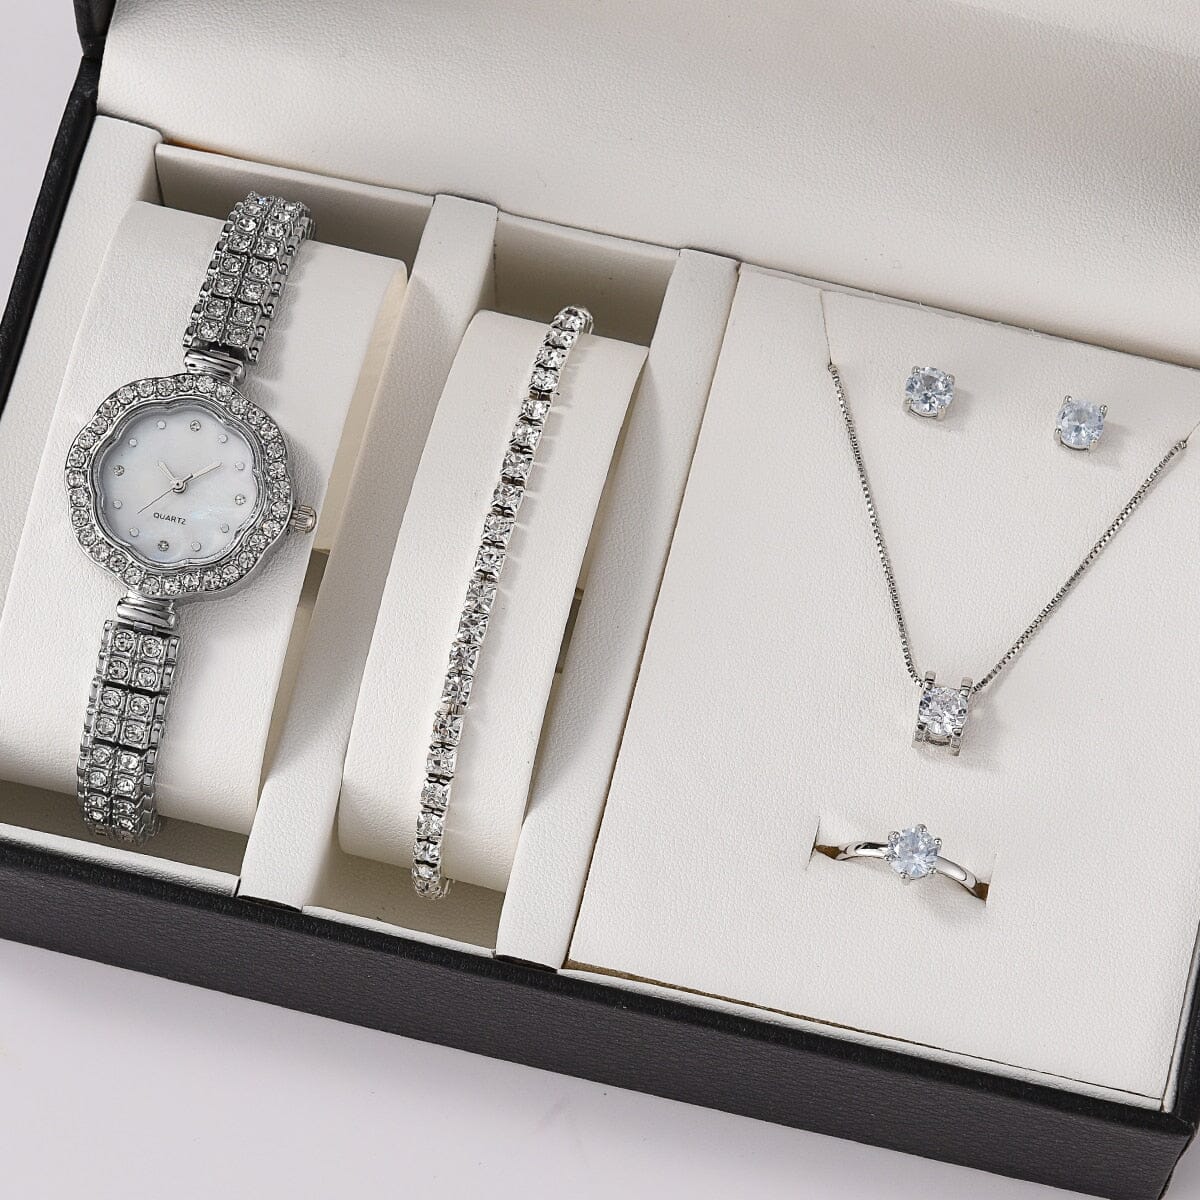 anywhere else. Elevate your fashion game with the 6PCS Set Luxury Watch Women Ring Necklace Earrings Rhinestone Fashion Wristwatch Female Casual Ladies Watches Bracelet Set Clock - Add a Touch of Glamour and Sophistication to Your Style Today! Mechanical Watches PikNik 